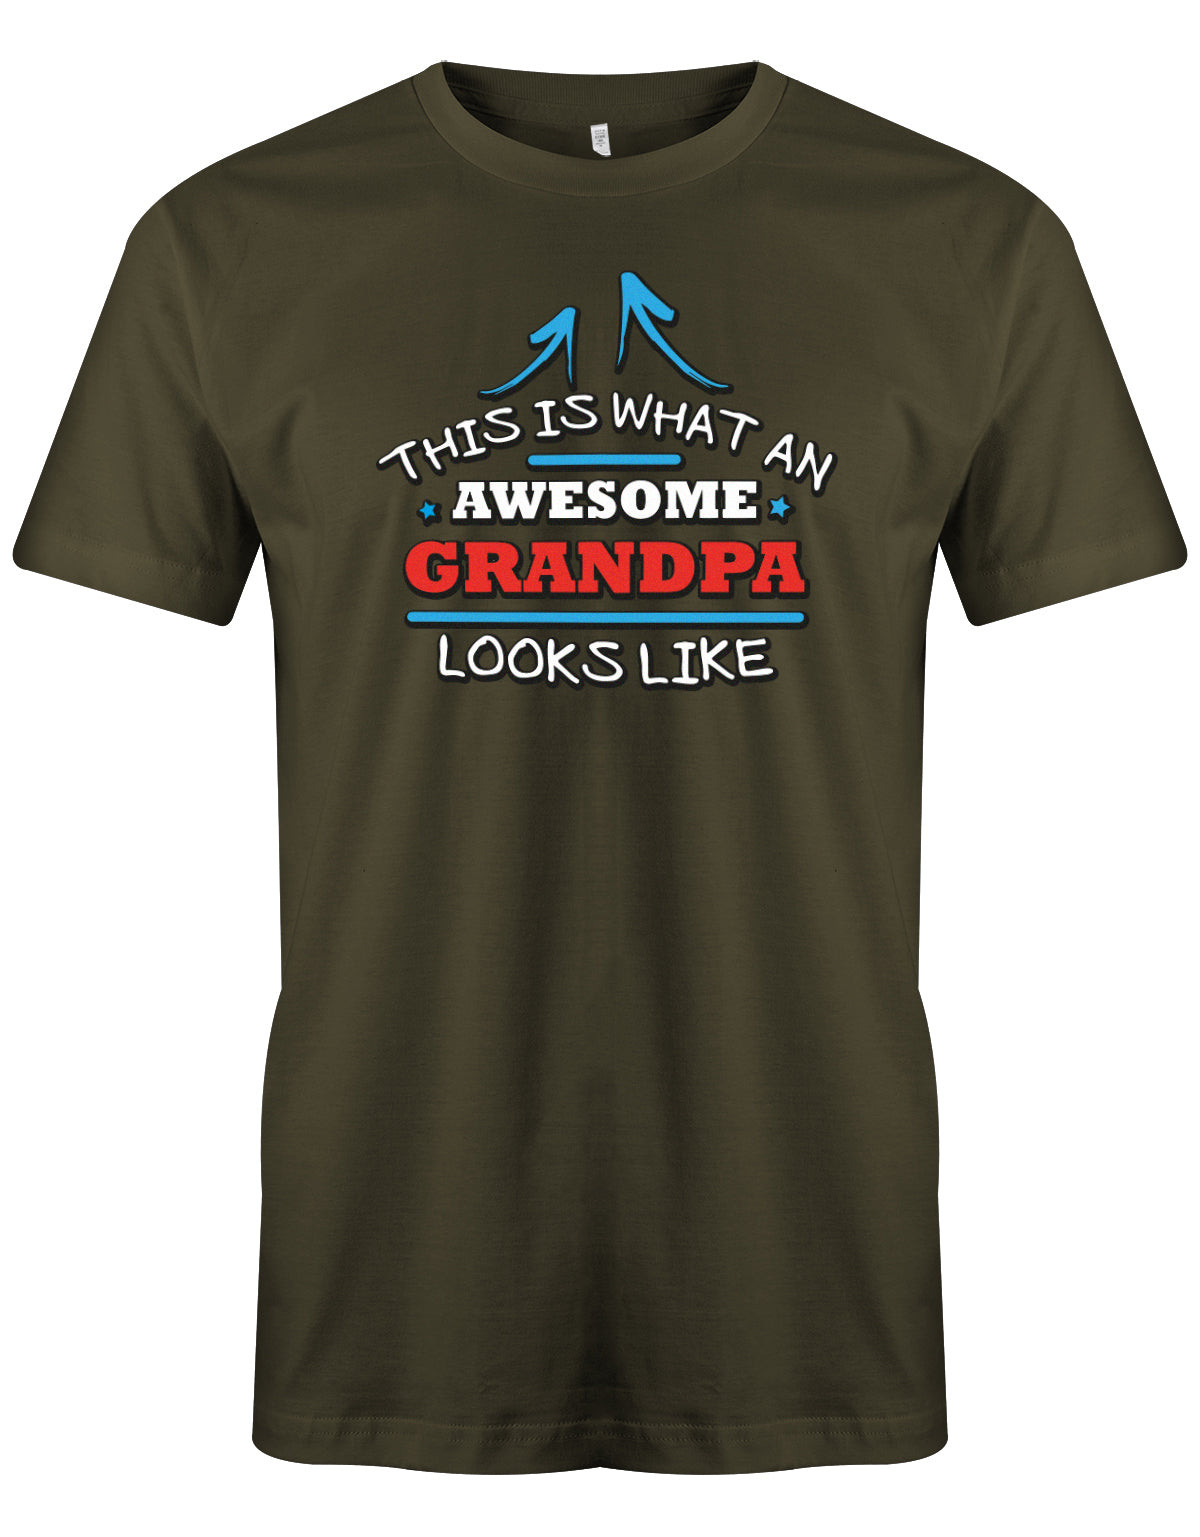 Opa T-Shirt – This is what an awesome Grandpa looks like. So sieht ein toller Opa aus. Army